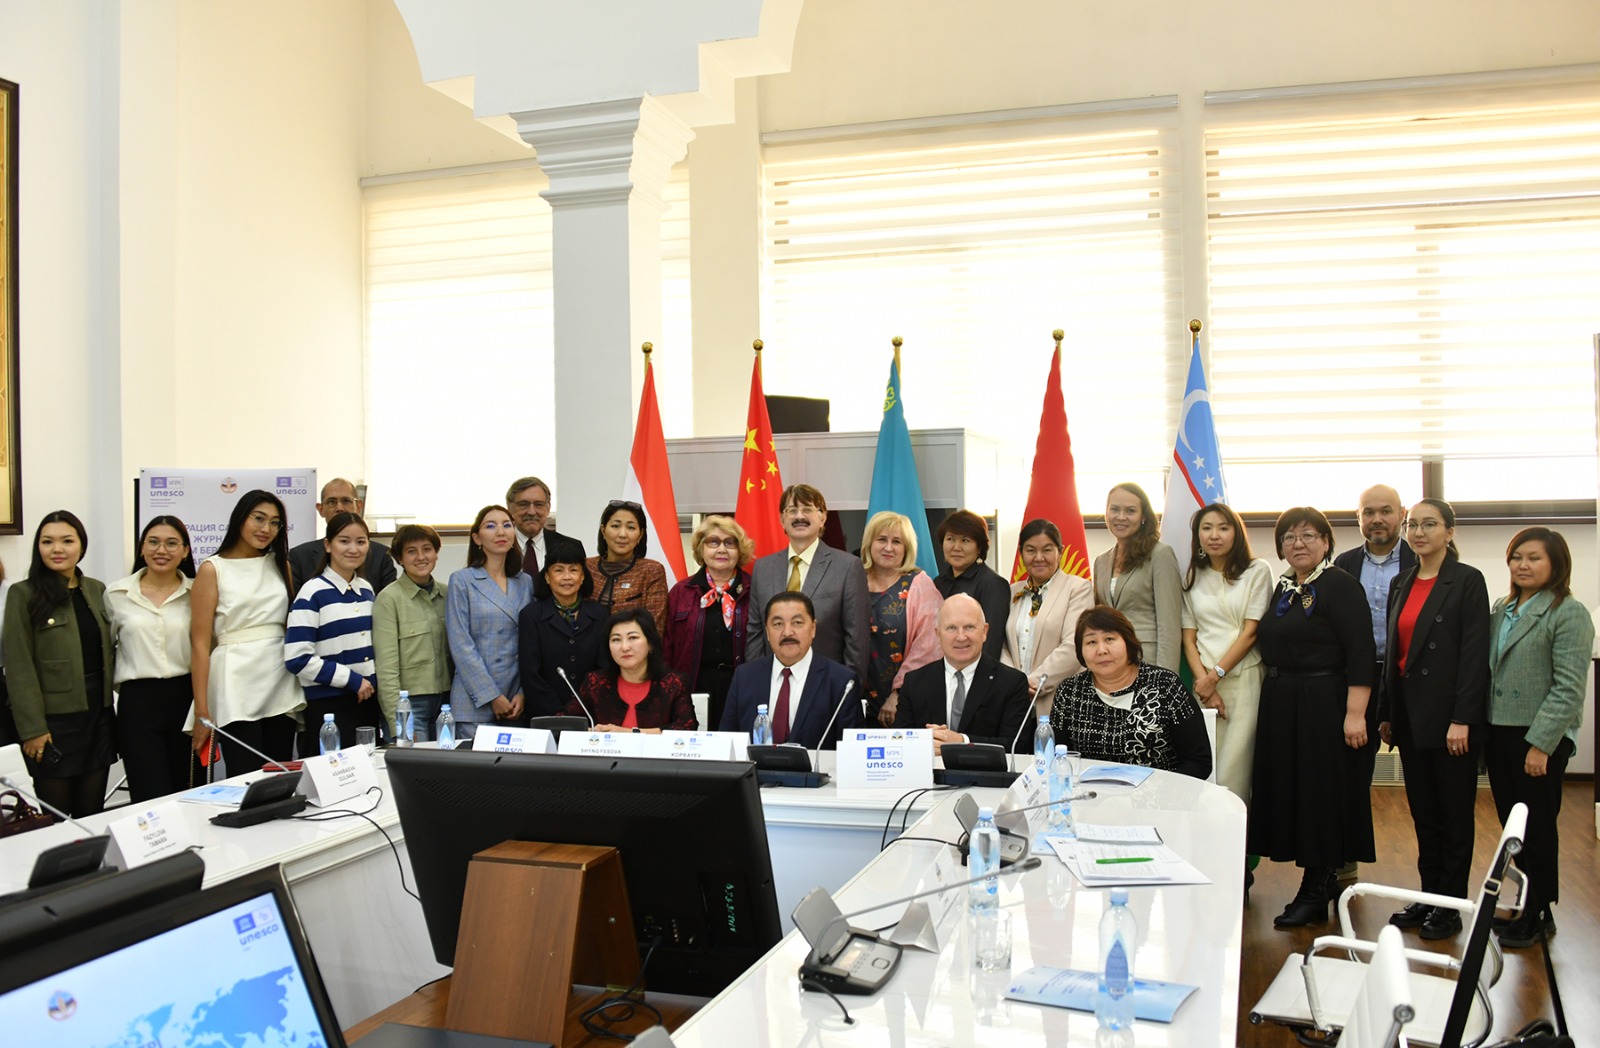 The project "Region - Central Asia: journalistic education on migration issues" was launched in KazNU